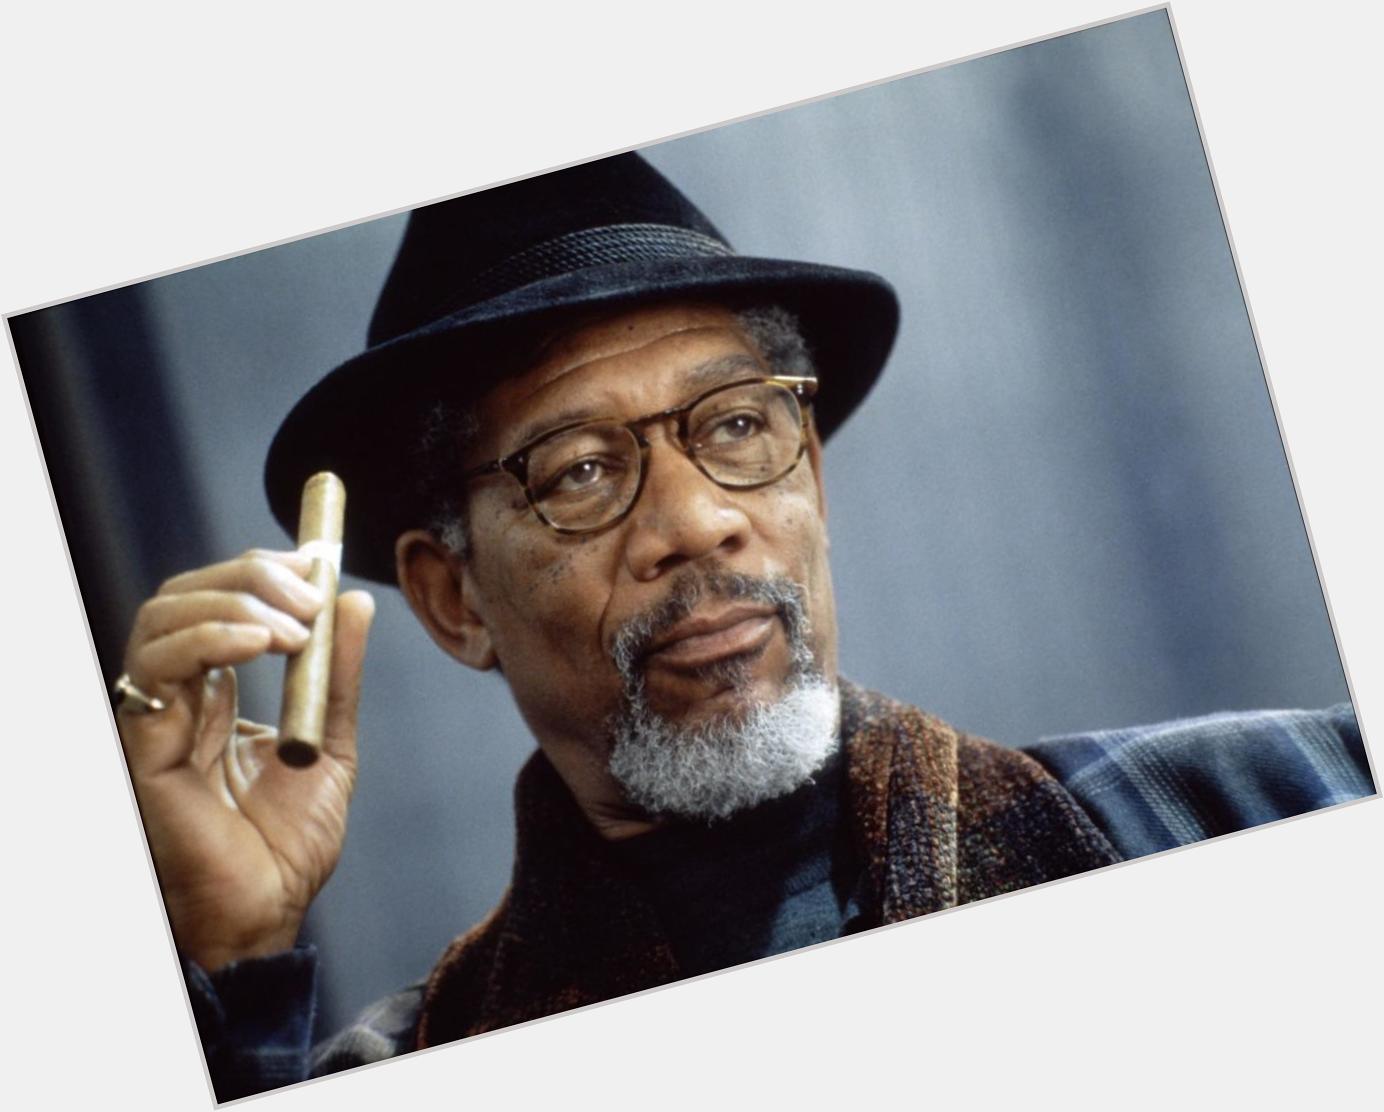 Happy birthday to one of the best actors of all time, Morgan Freeman! 